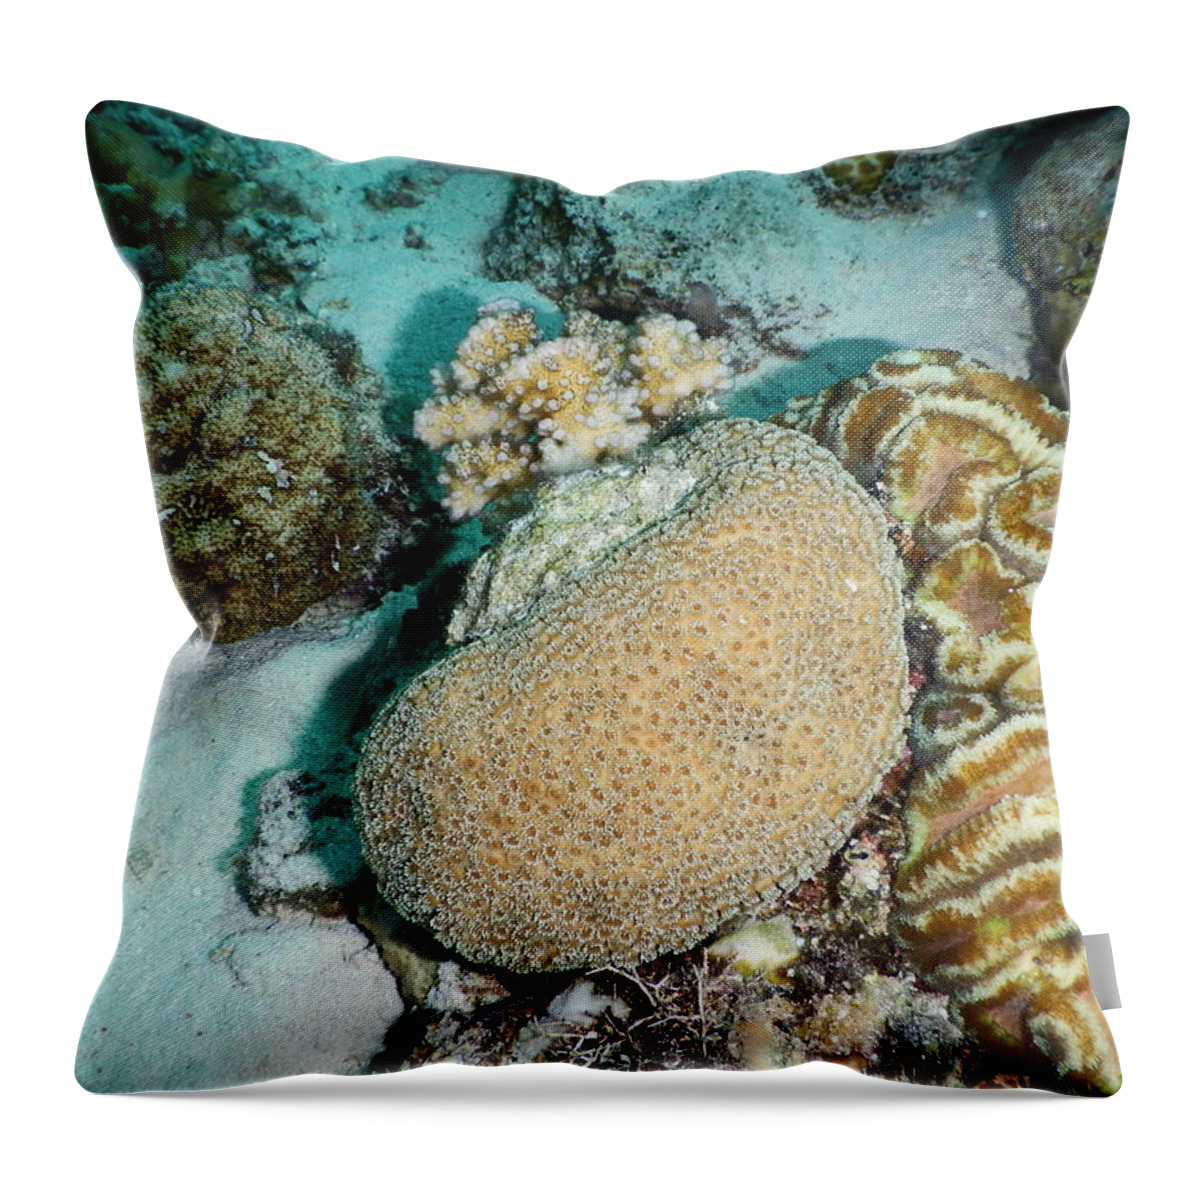 Biodiversity Throw Pillow featuring the photograph Mixed Corals by Carleton Ray